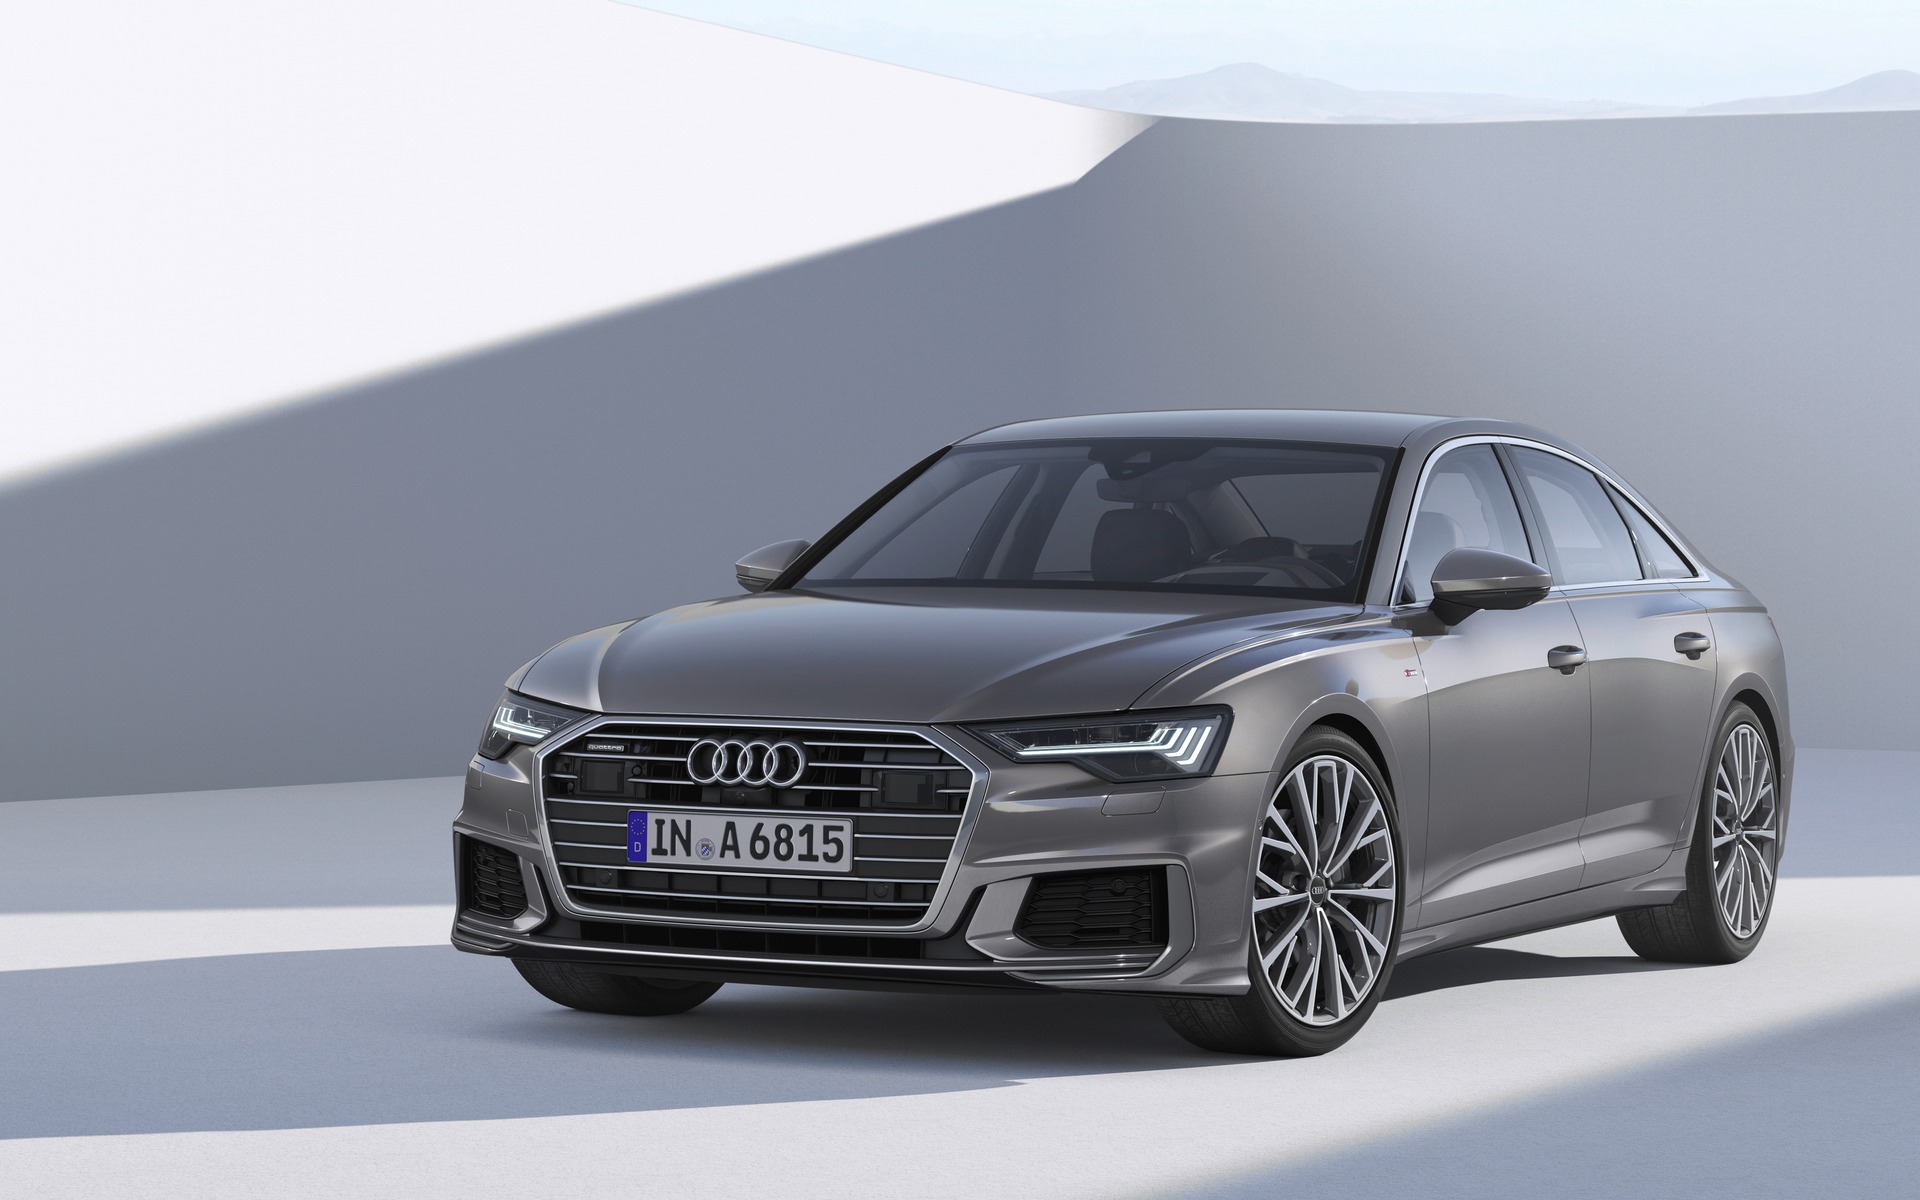 2019 Audi A6: We're Driving it This Week! - The Car Guide